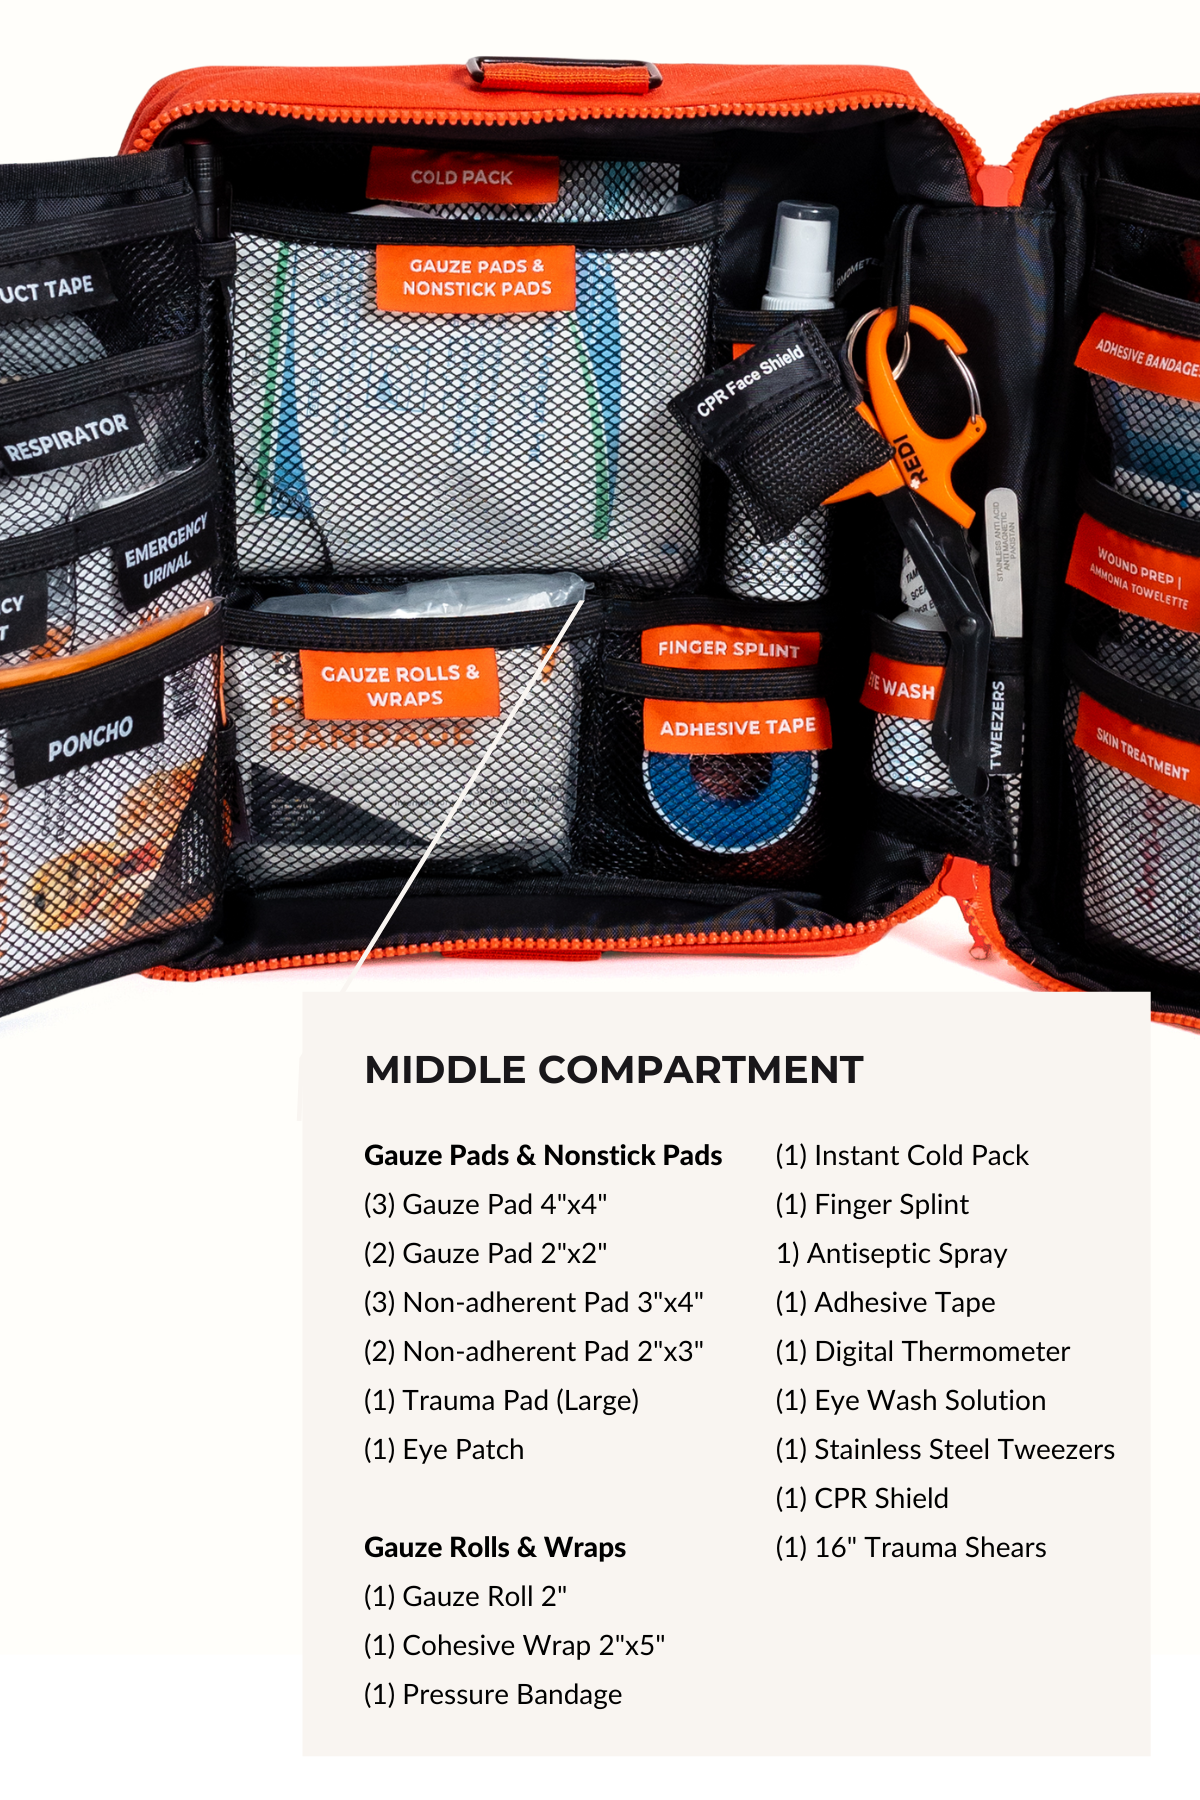 List of first aid items, gauze pads and rolls found inside the middle compartment of the Roadie first aid kit. 